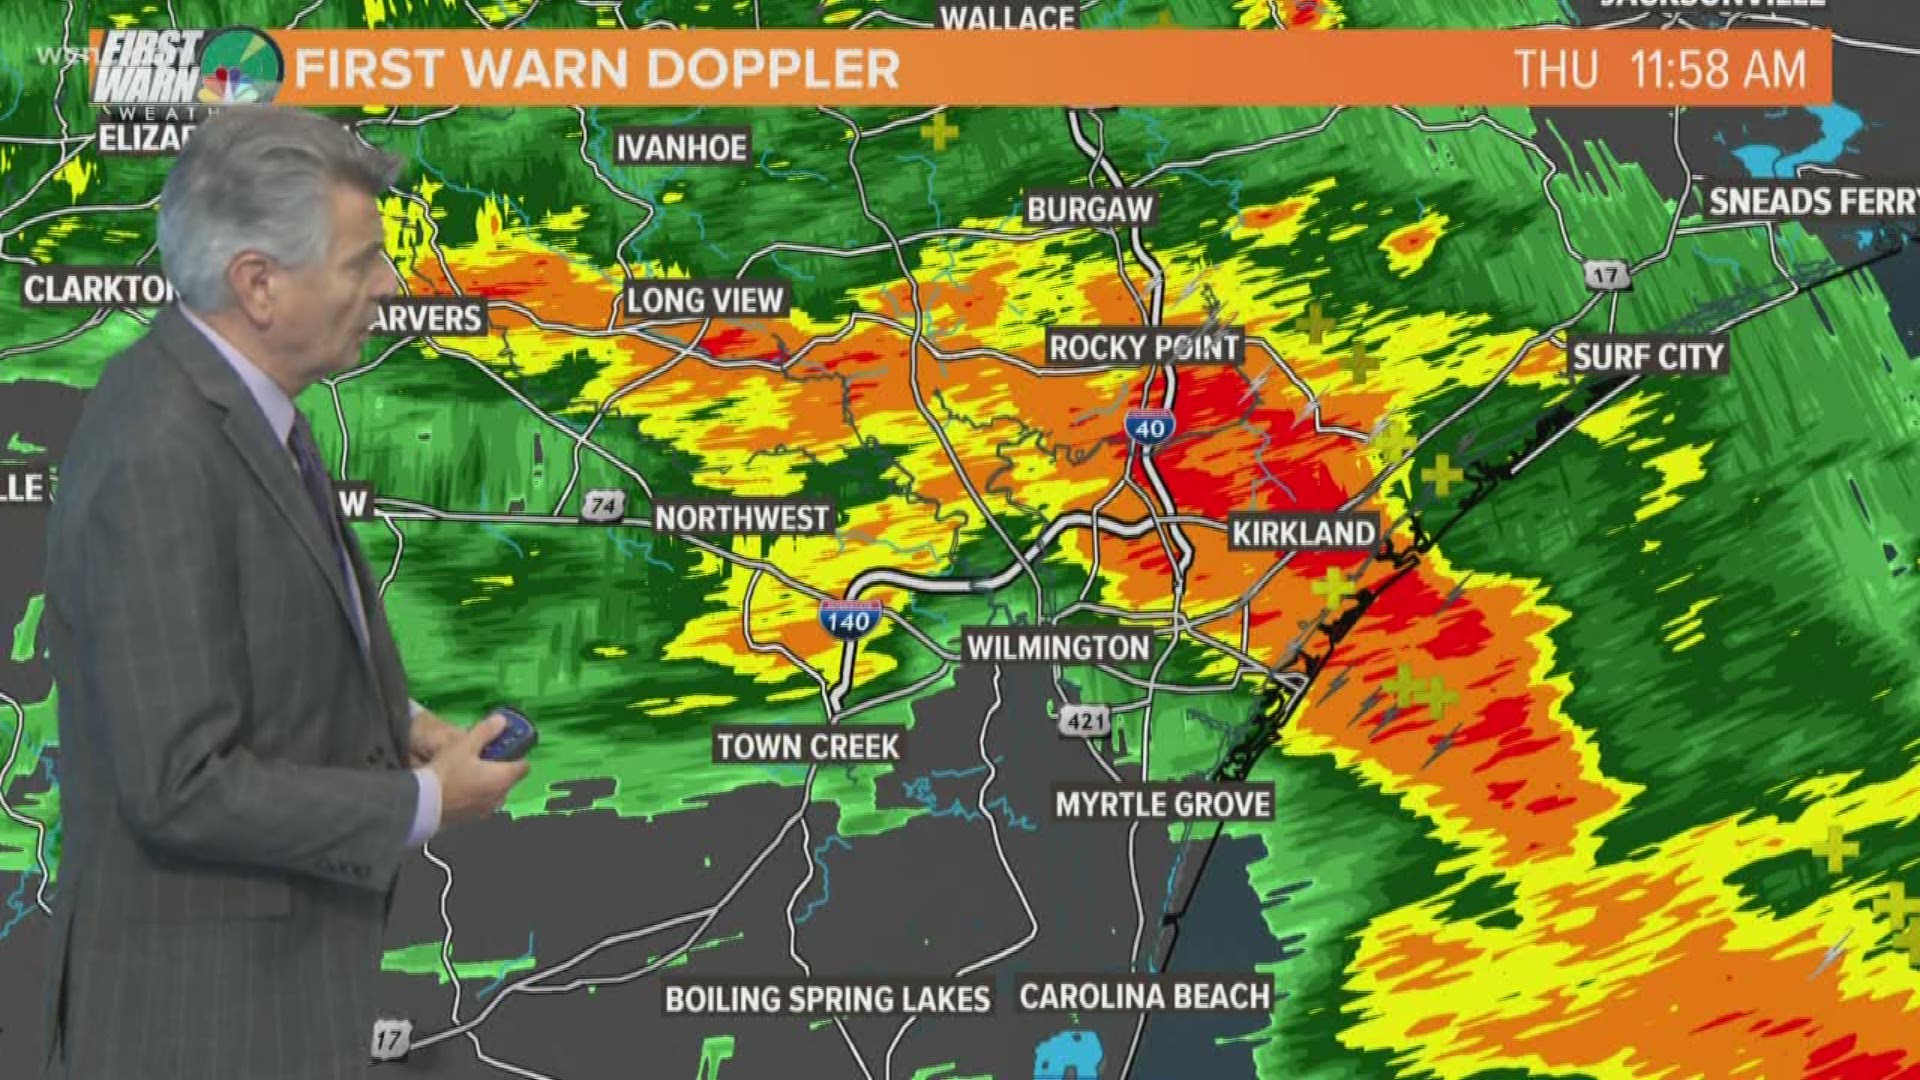 Hurricane Dorian continues to blast the Carolina coast with 110 mph winds. The storm is expected to bring life-threatening storm surge and the potential for tornadoes to areas from Charleston to the Outer Banks.